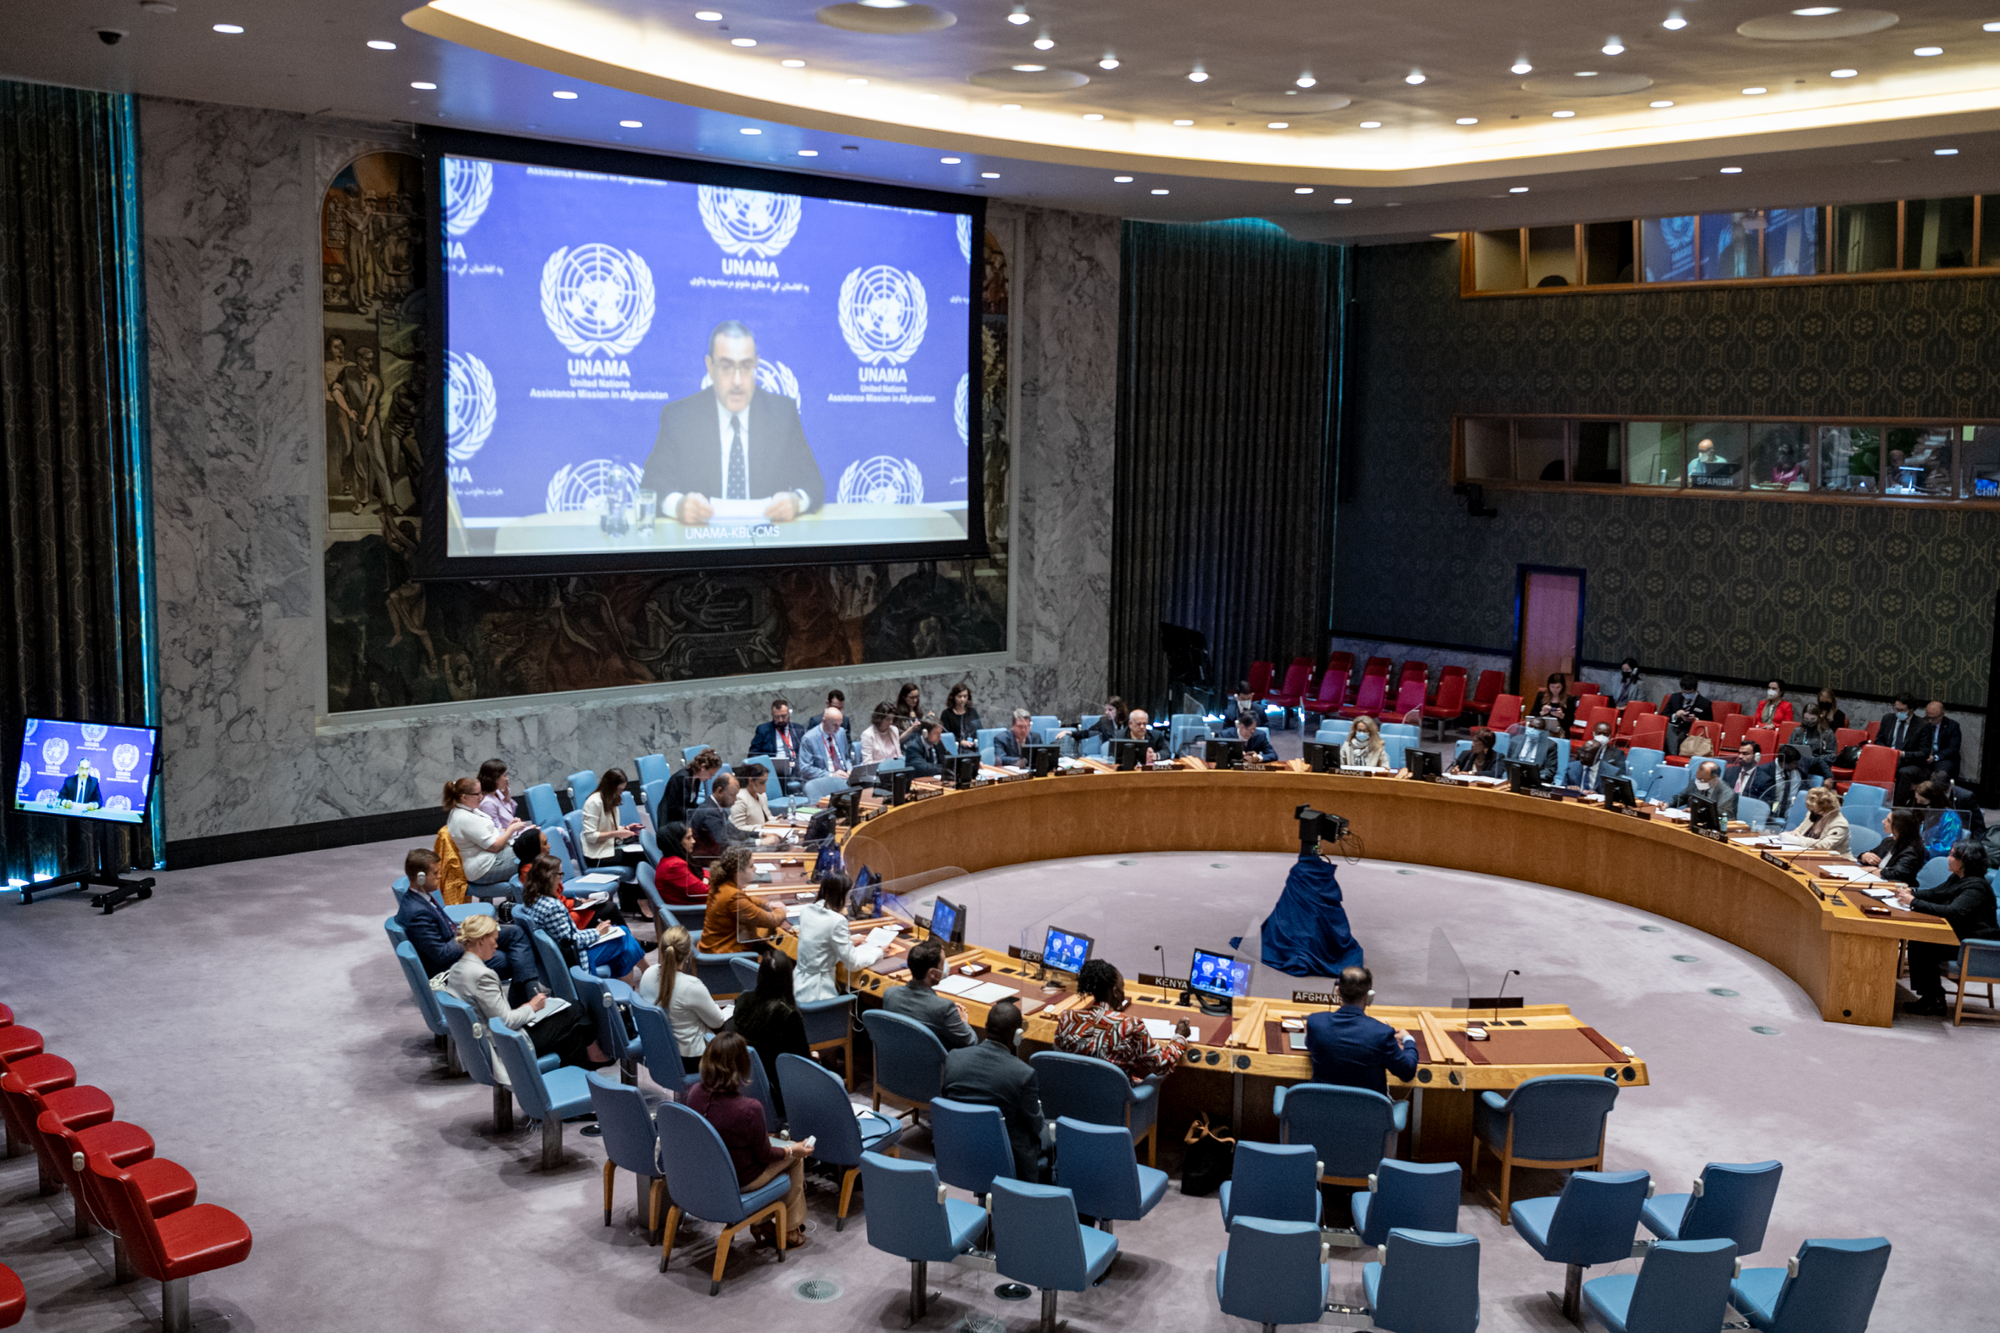 Ramiz Alakbarov (on screen), Deputy Special Representative of the Secretary-General, Resident and Humanitarian Coordinator for Afghanistan, briefs the Security Council meeting on the situation in Afghanistan and its implications for international peace and security.